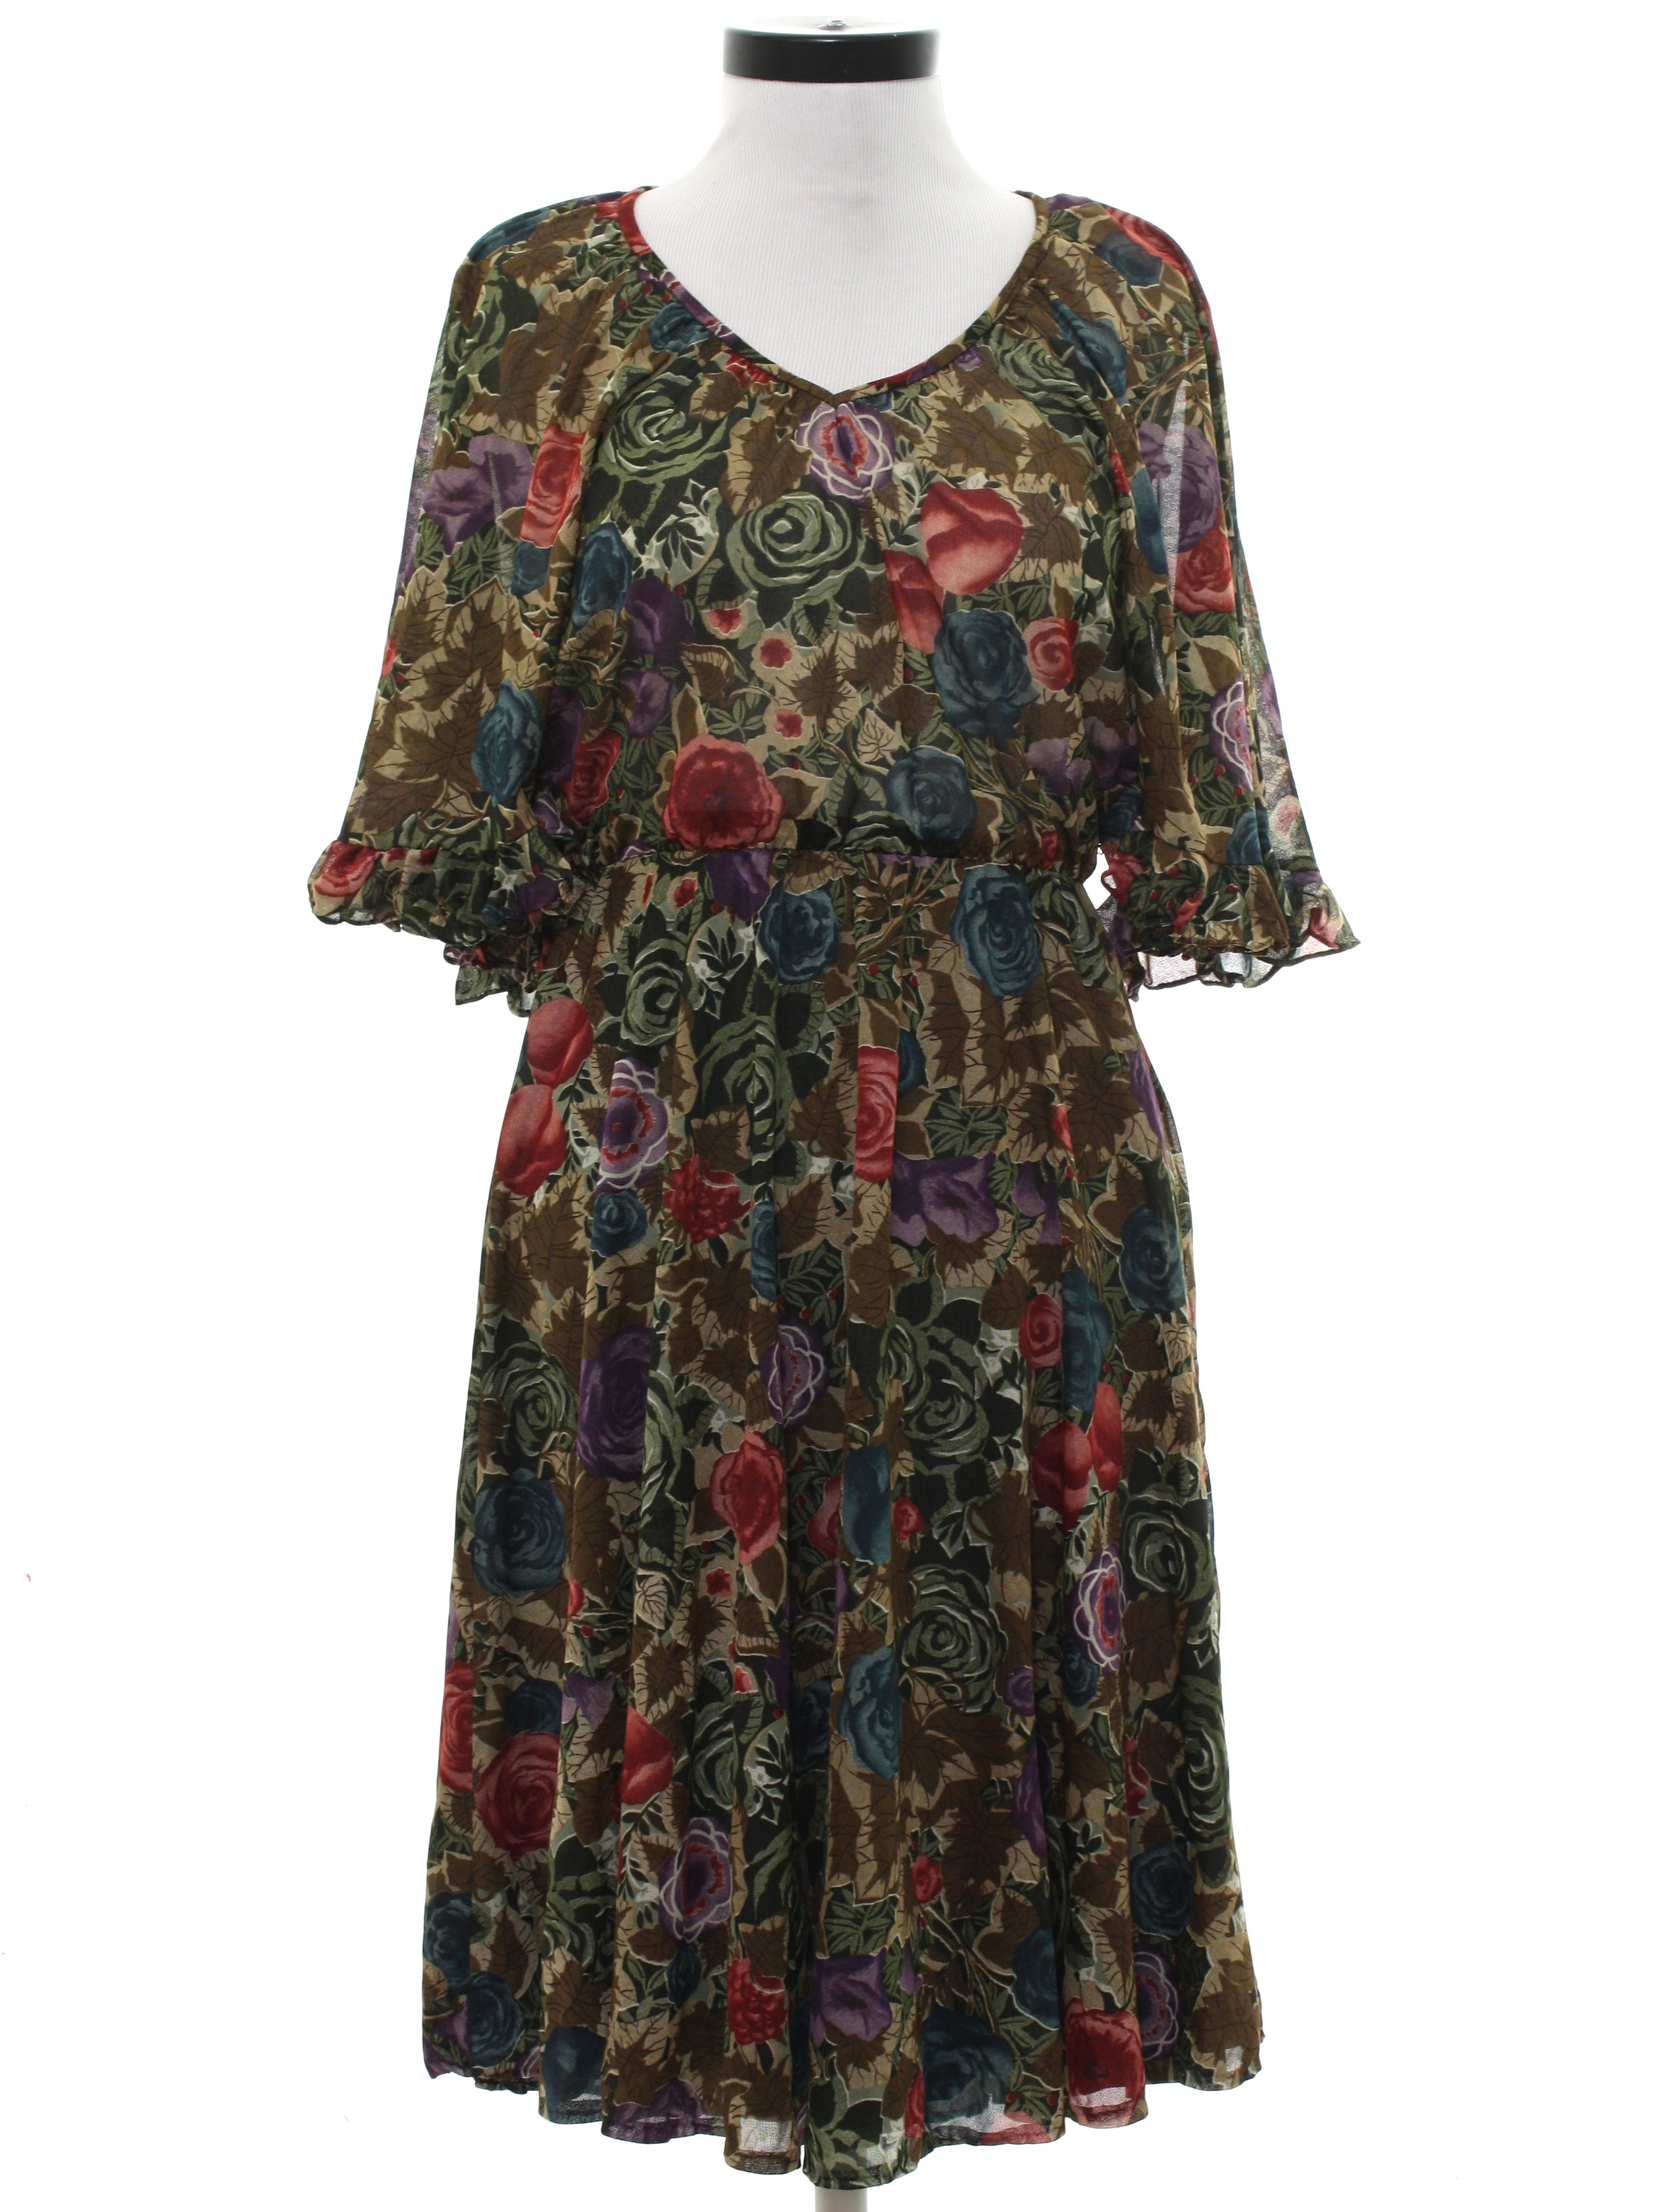 Vintage Coco 70's Hippie Dress: Late 70s or Early 80s -Coco- Womens ...